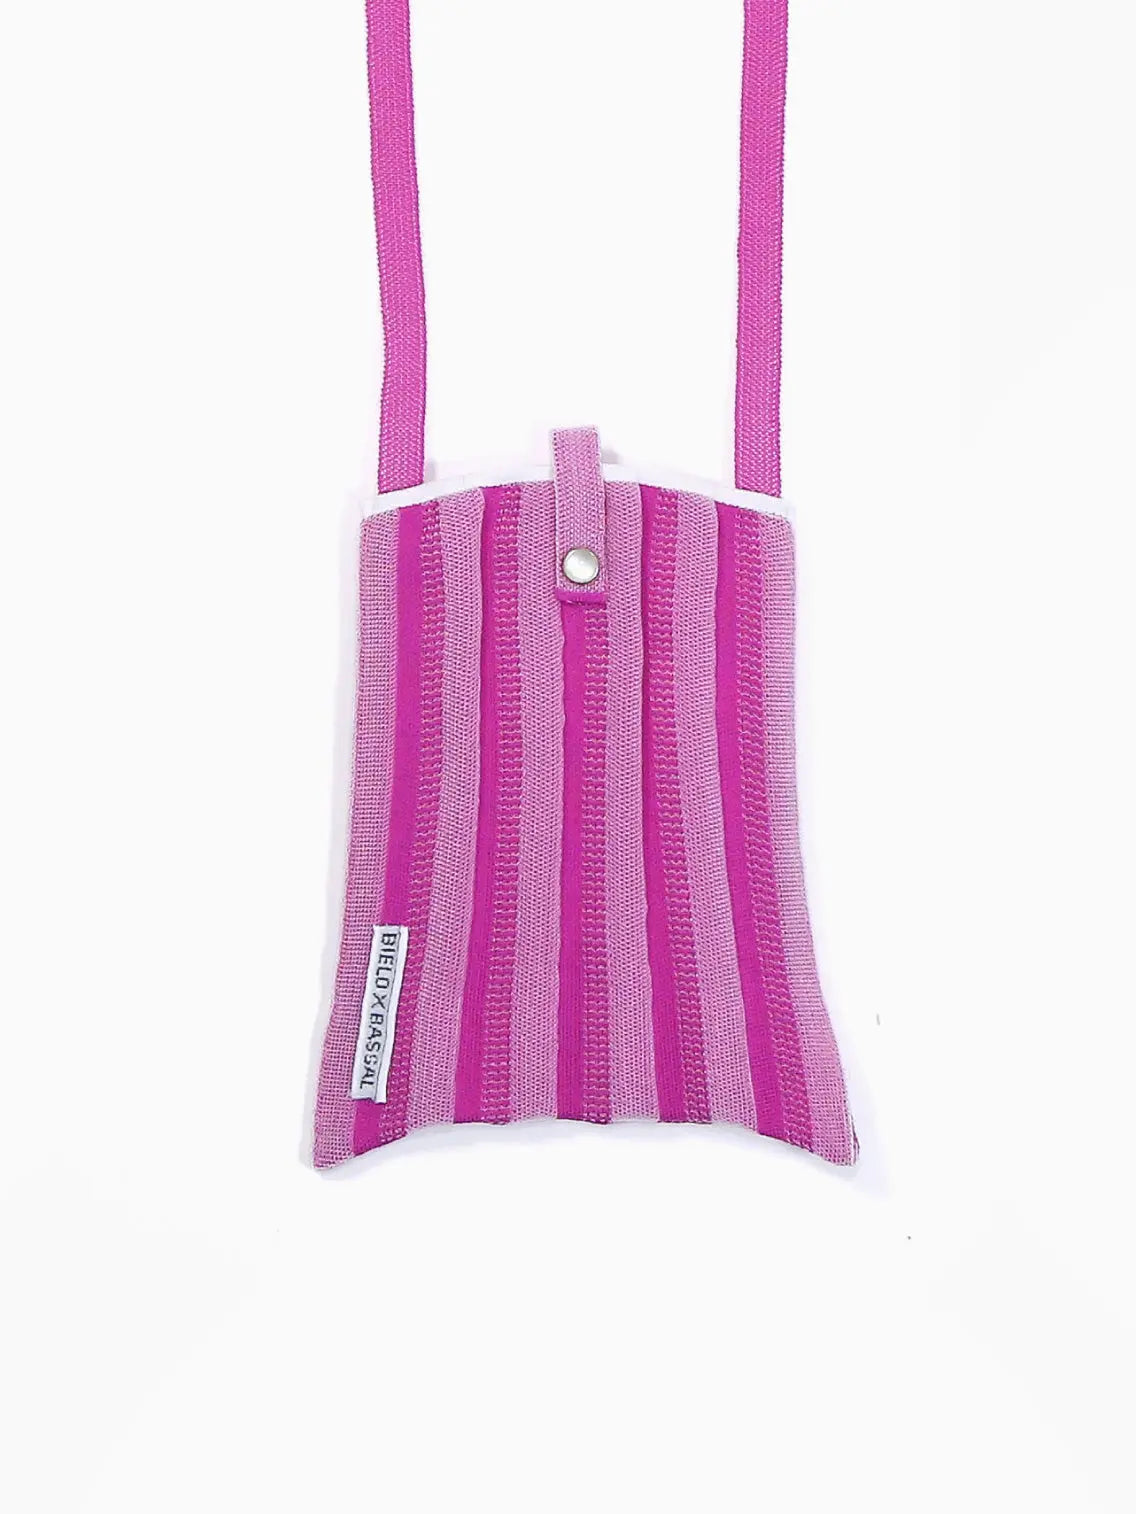 A small, rectangular Lilac Shoulder Bag with vertical pink and purple stripes. It has a snap button closure on top, and the strap is of the same material and color scheme. A small white tag with text from Bielo x Bassal Store is sewn on one side of the bag. The background is white.